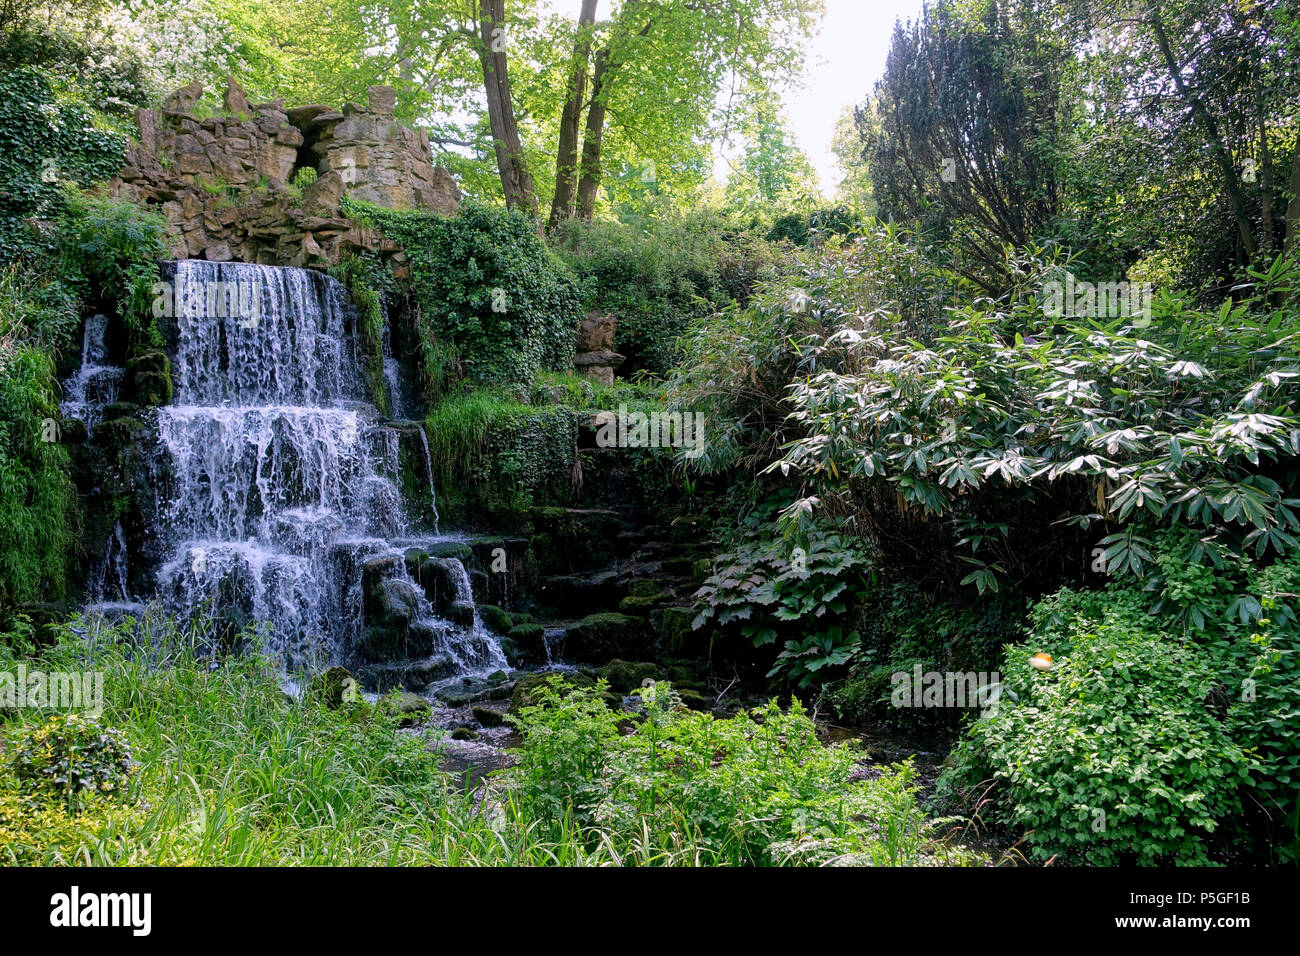 N/A. Anglais : Bowood - Wiltshire, Angleterre. 26 mai 2016, 07:01:25. Daderot 279 Cascade - Bowood - Wiltshire, Angleterre - DSC00492 Banque D'Images